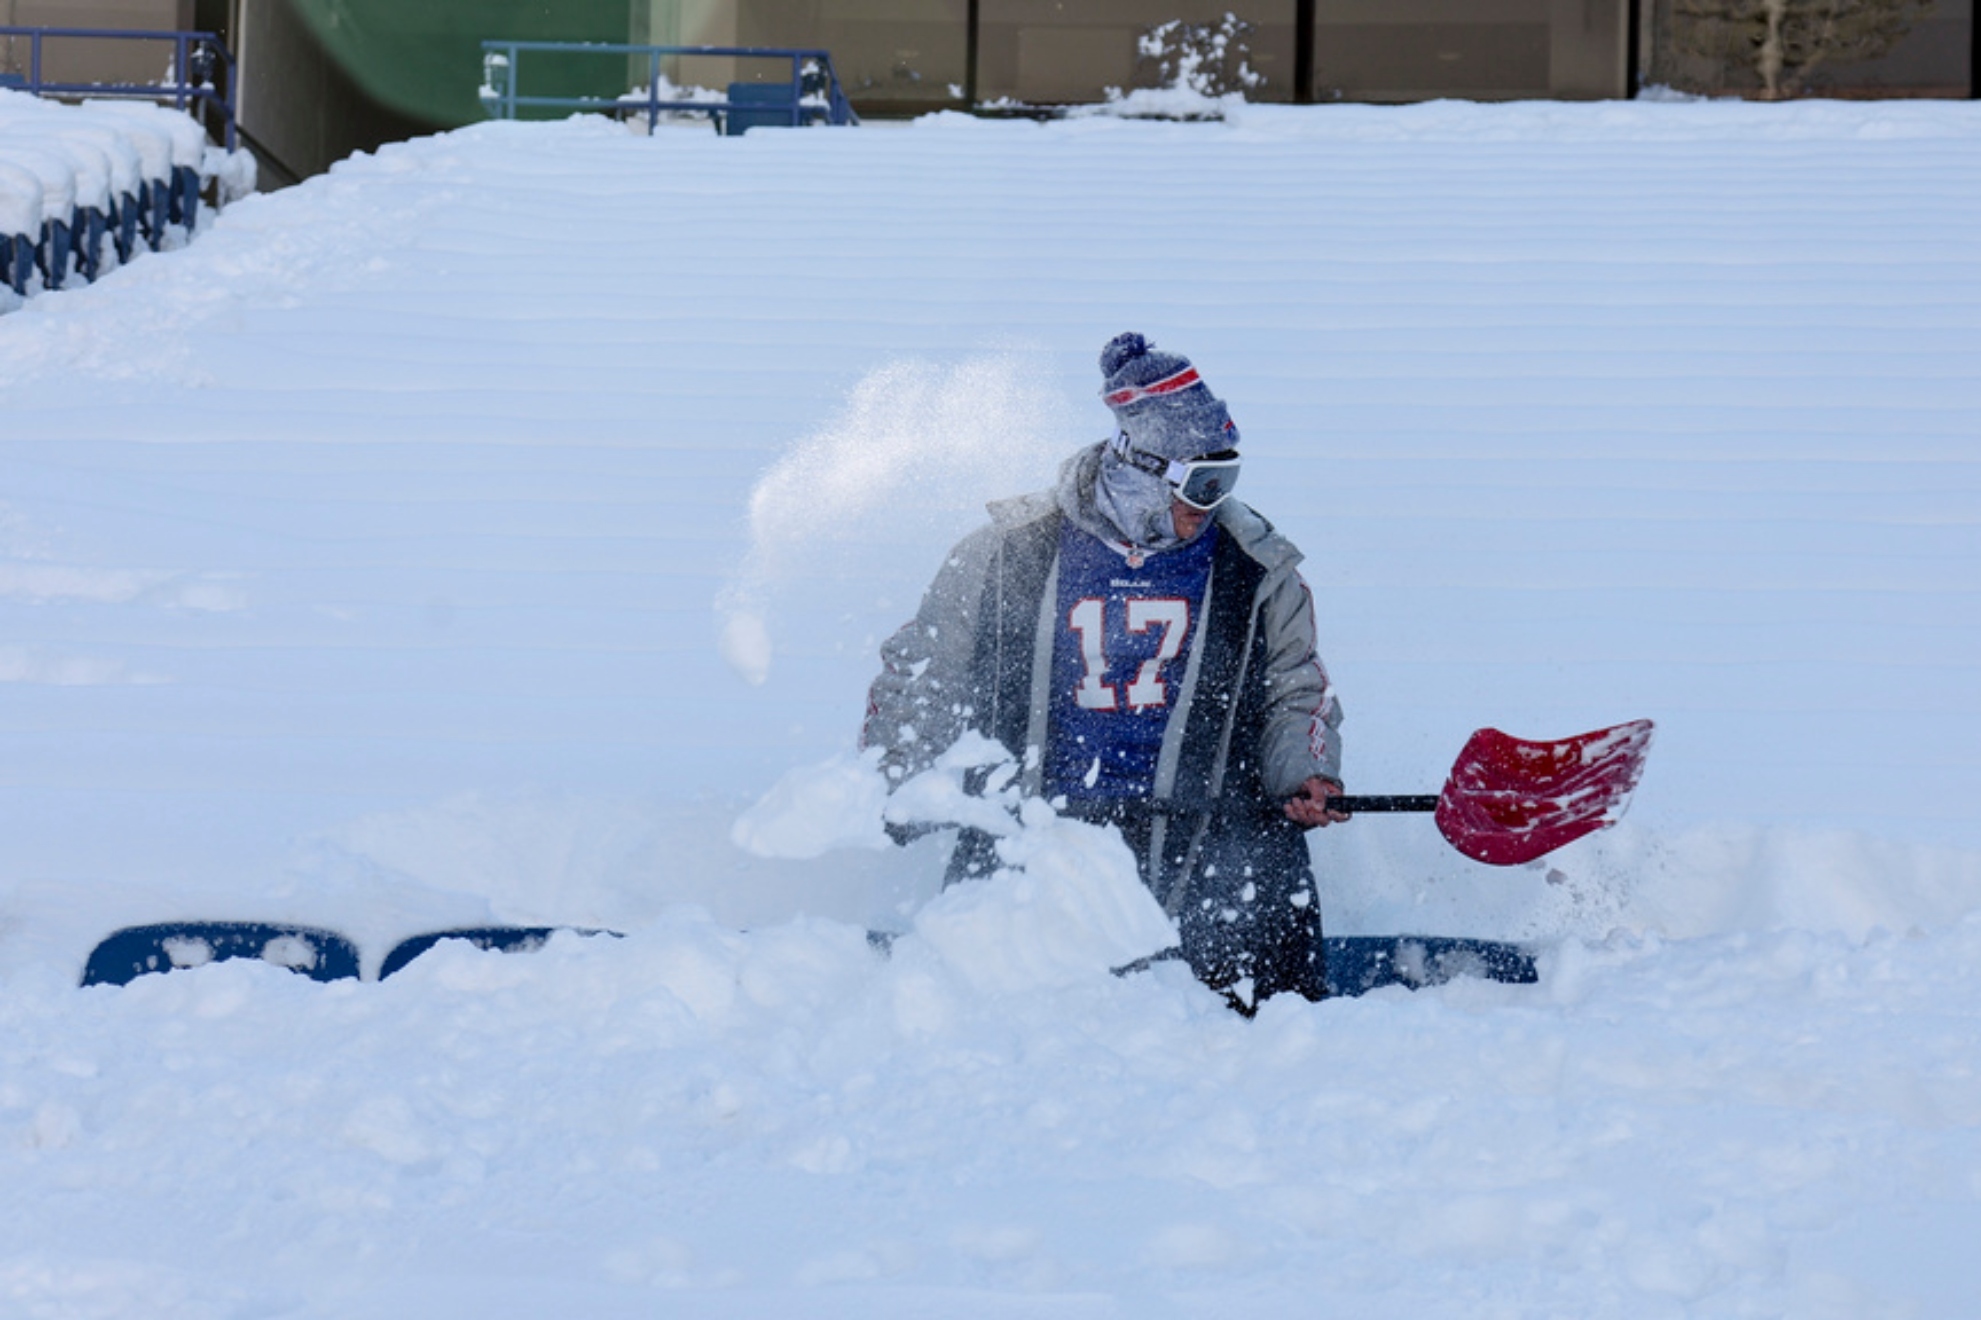 Tubs of Vaseline: NFL players reveal bizarre methods to deal with extreme cold